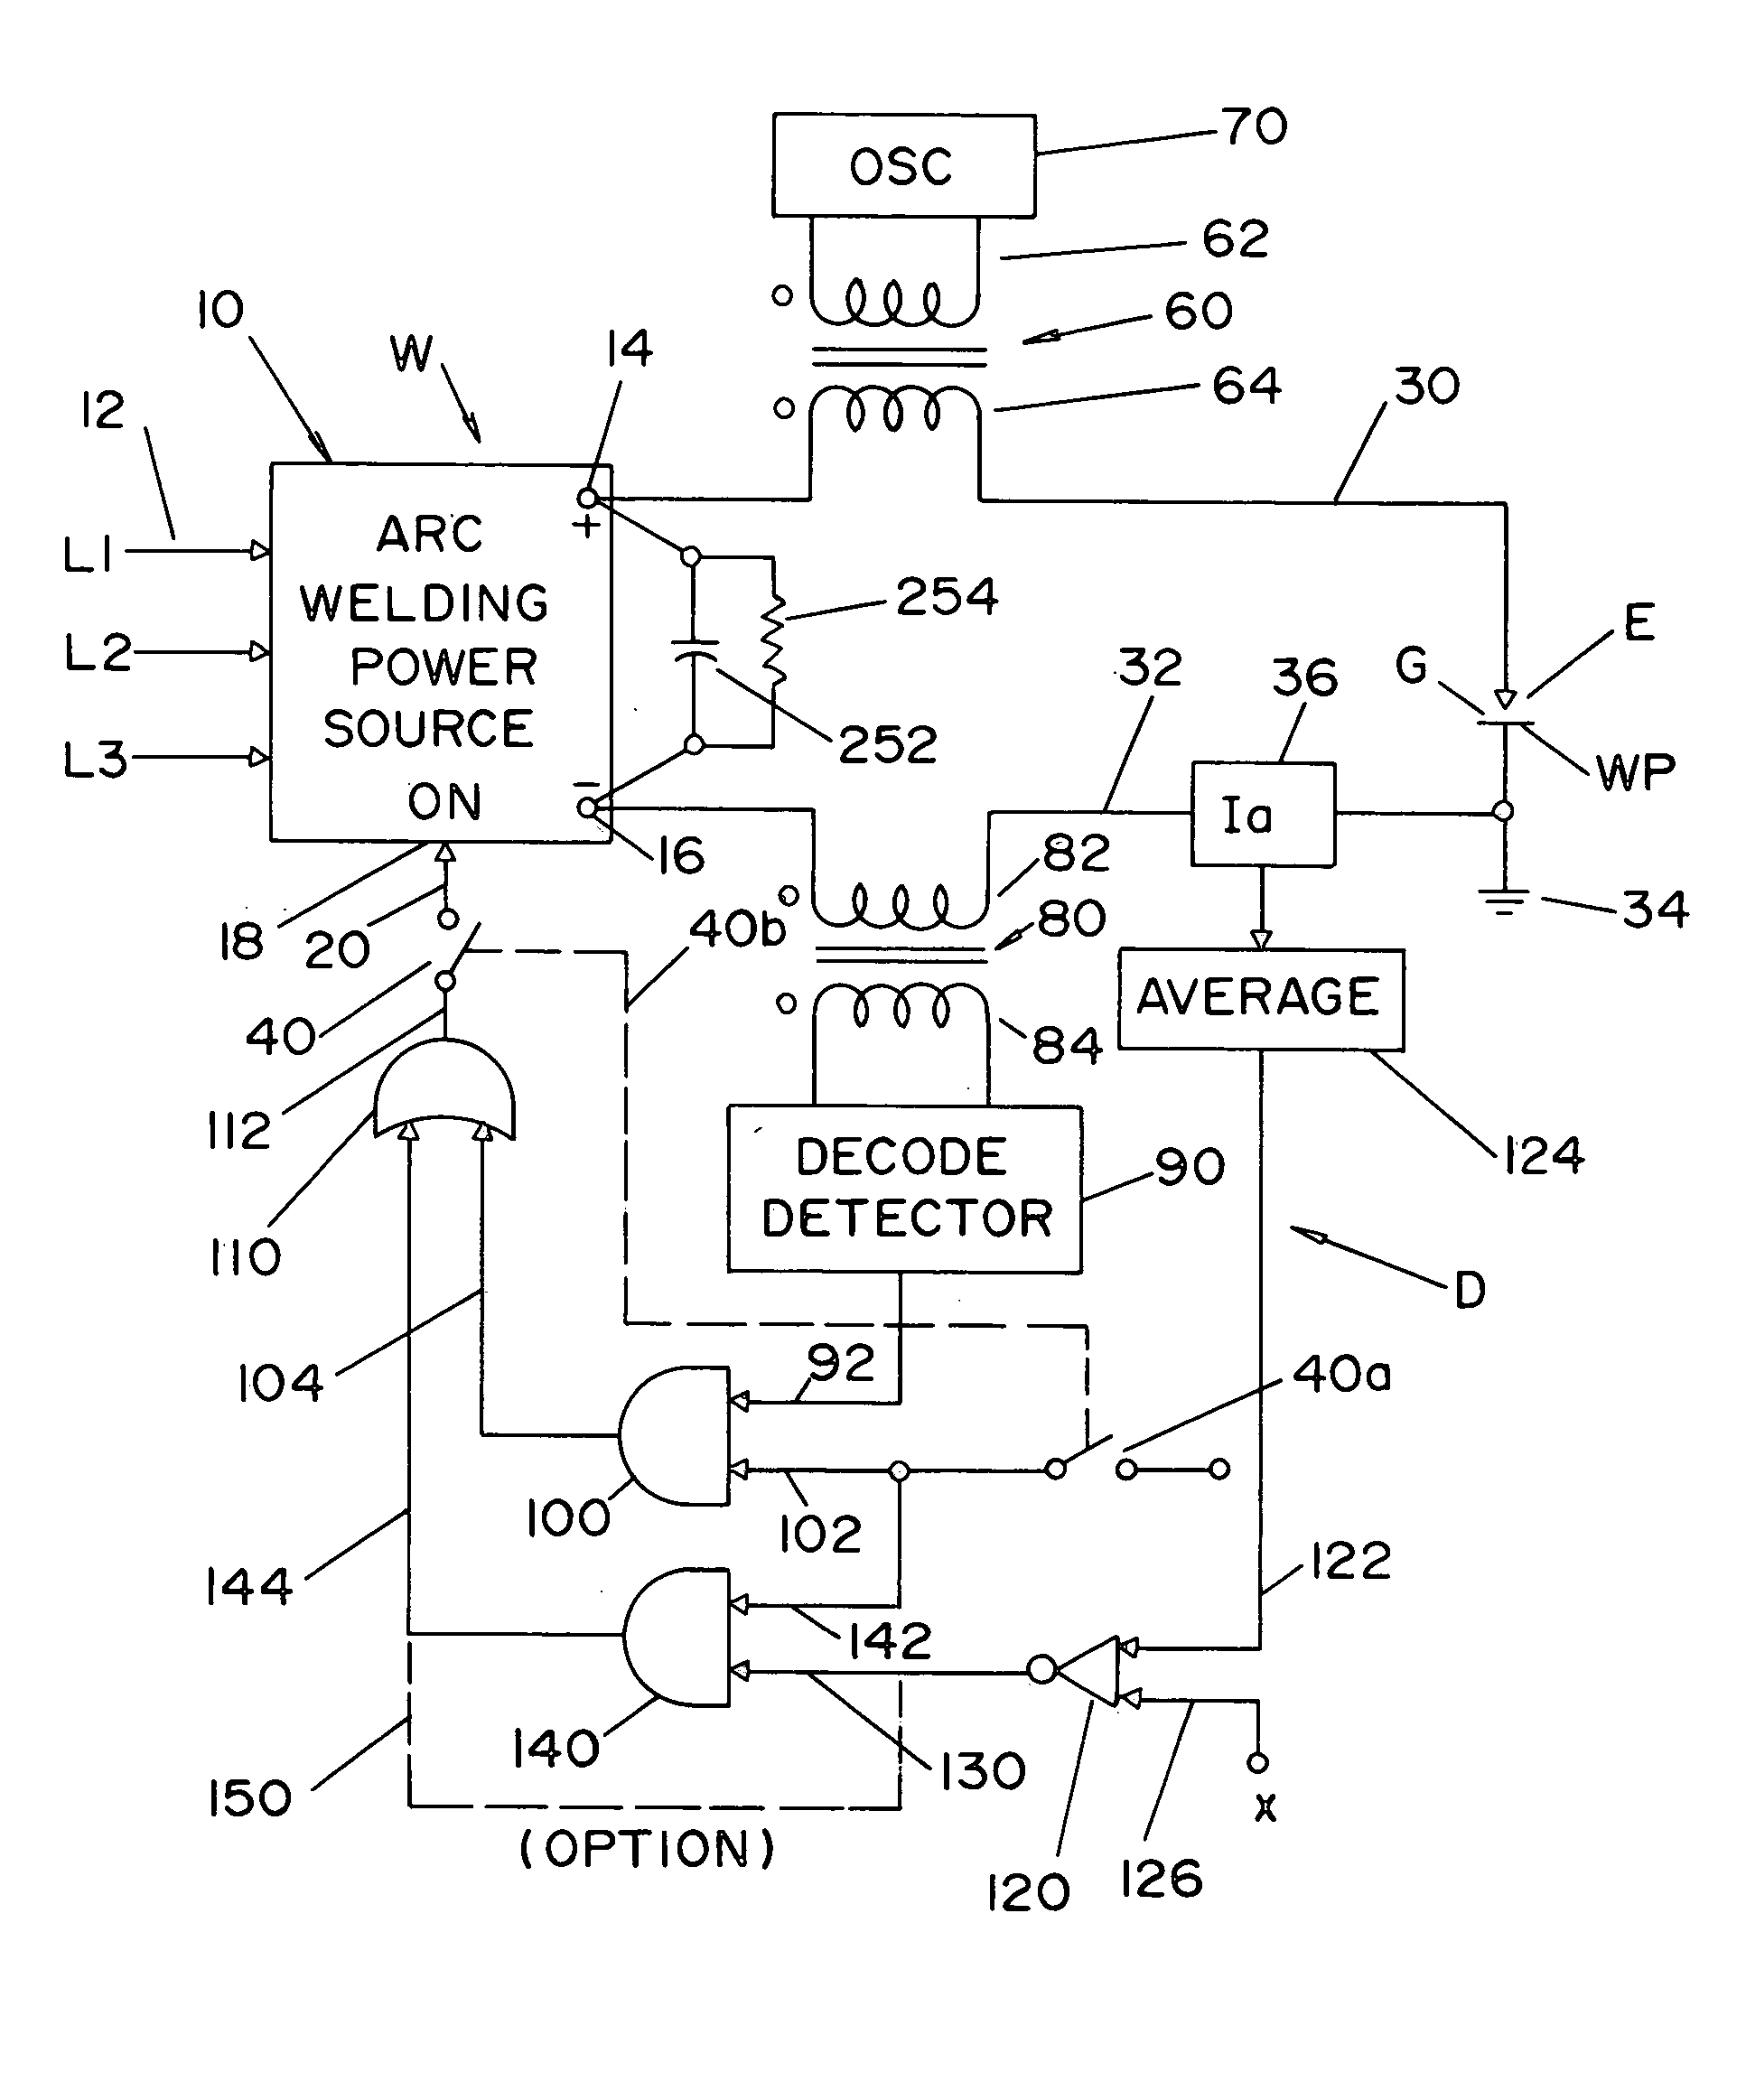 Device to control power source